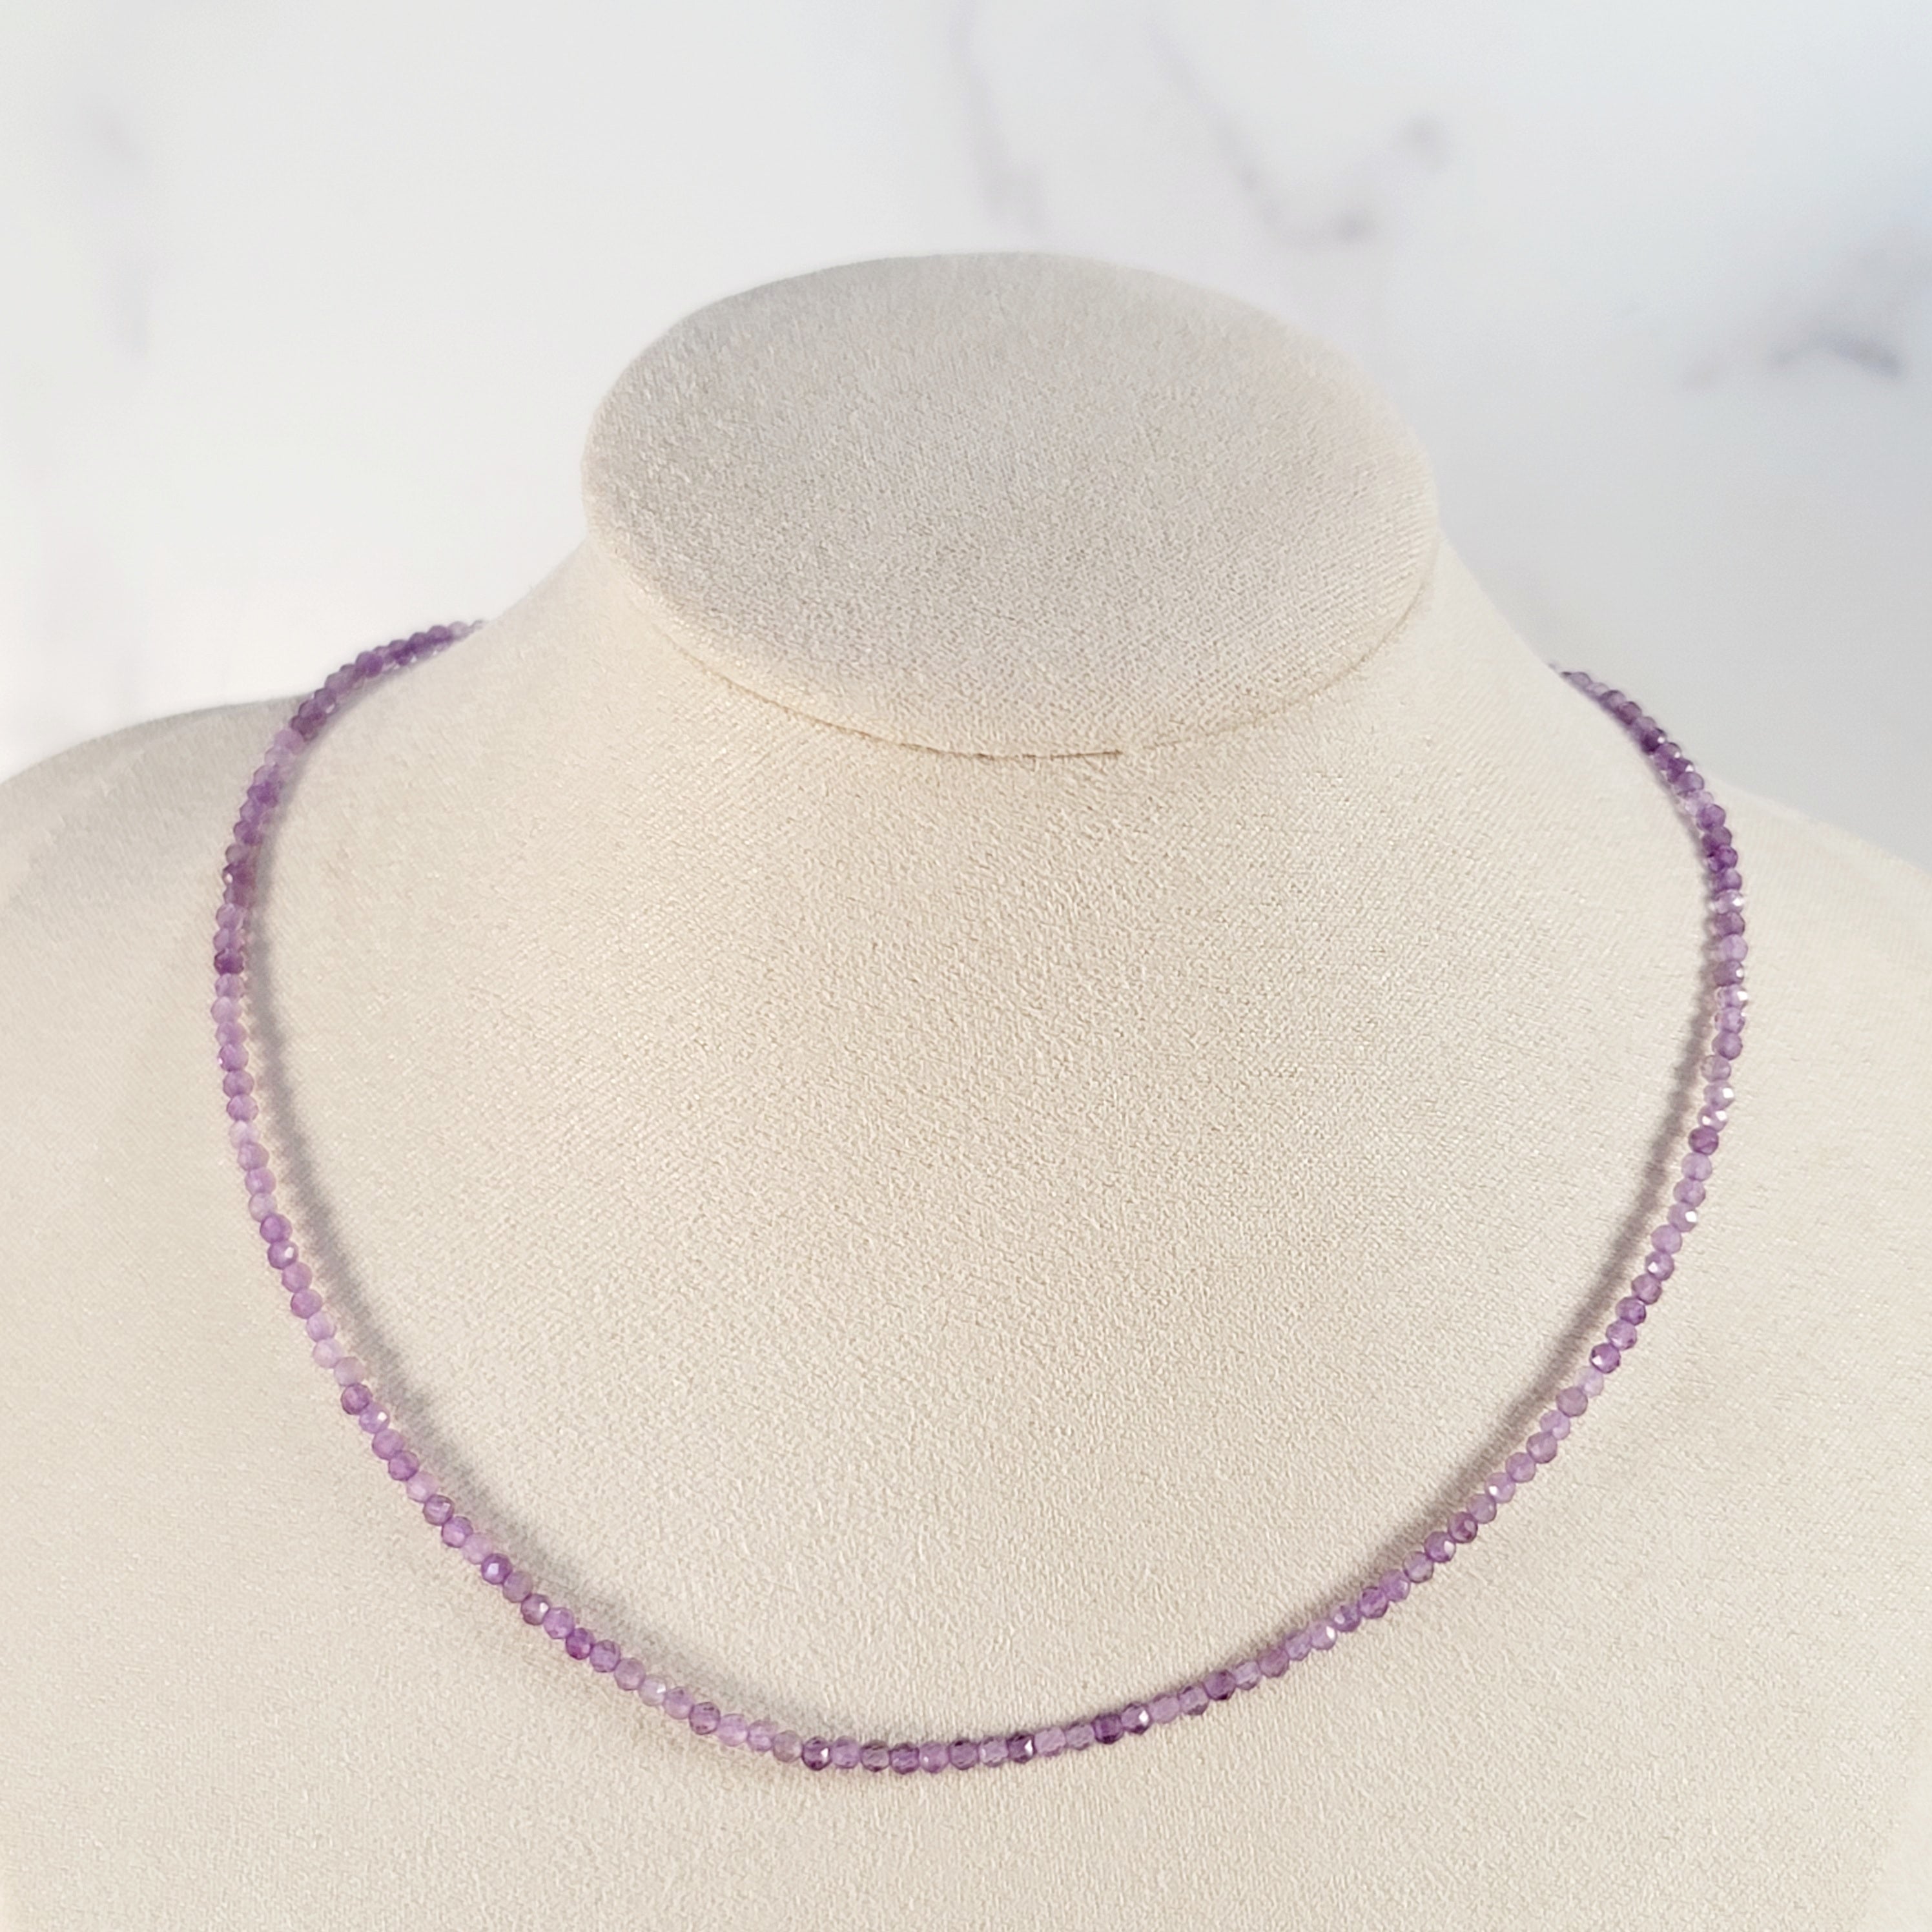 Amethyst Micro Faceted Choker/Layering Necklace for Enhancing Intuition and Connecting with Source Energy